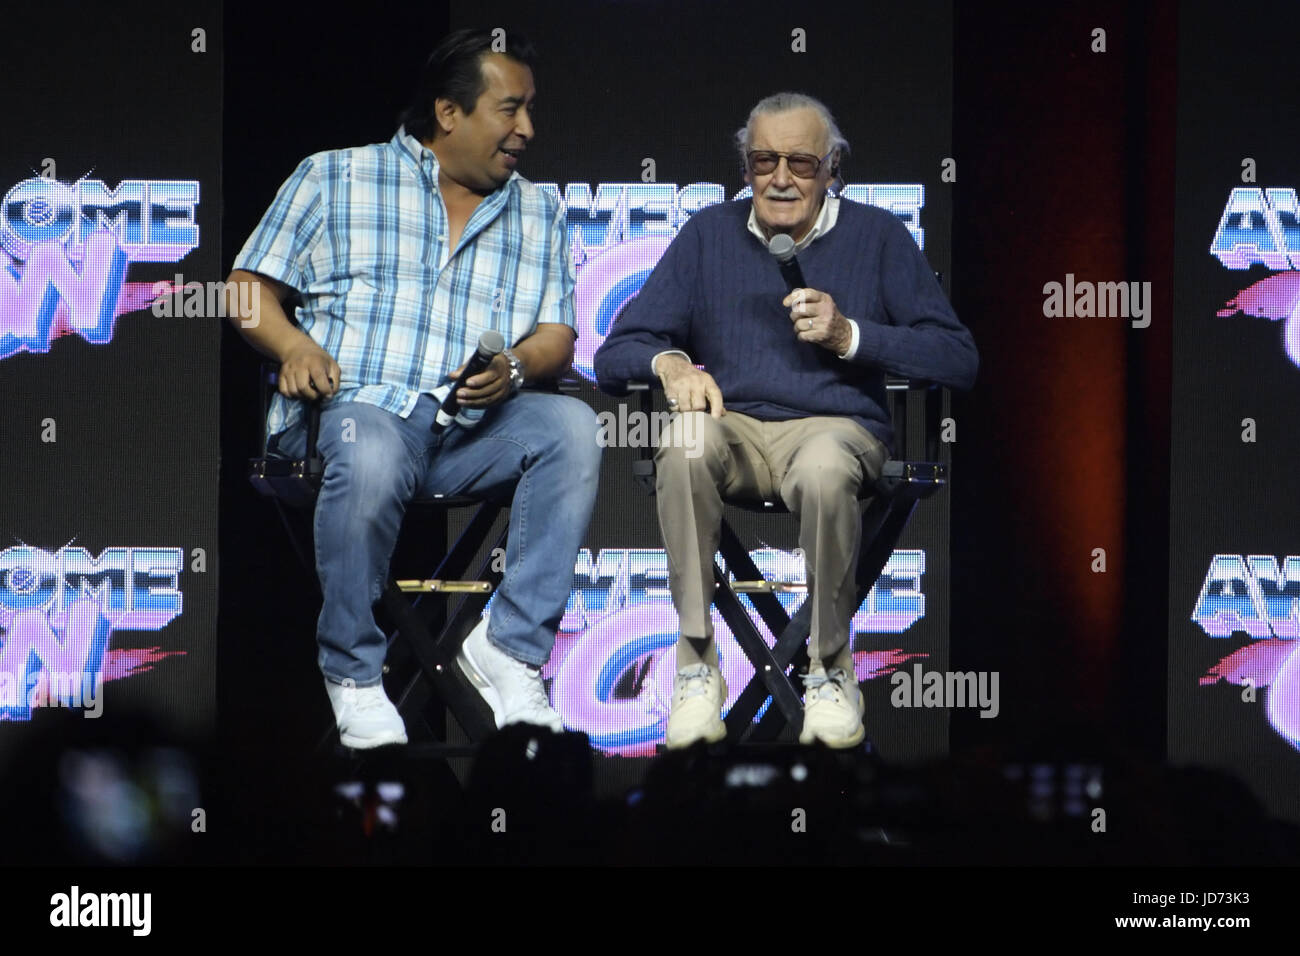 Washington, District of Columbia, USA. 18th June, 2017. Stan Lee, of Marvel Comics fame, speaking during a Q&A session at Awesome Con 2017. Sitting next to him, moderating the session, is a man that Stan introduced as Max. Credit: Evan Golub/ZUMA Wire/Alamy Live News Stock Photo